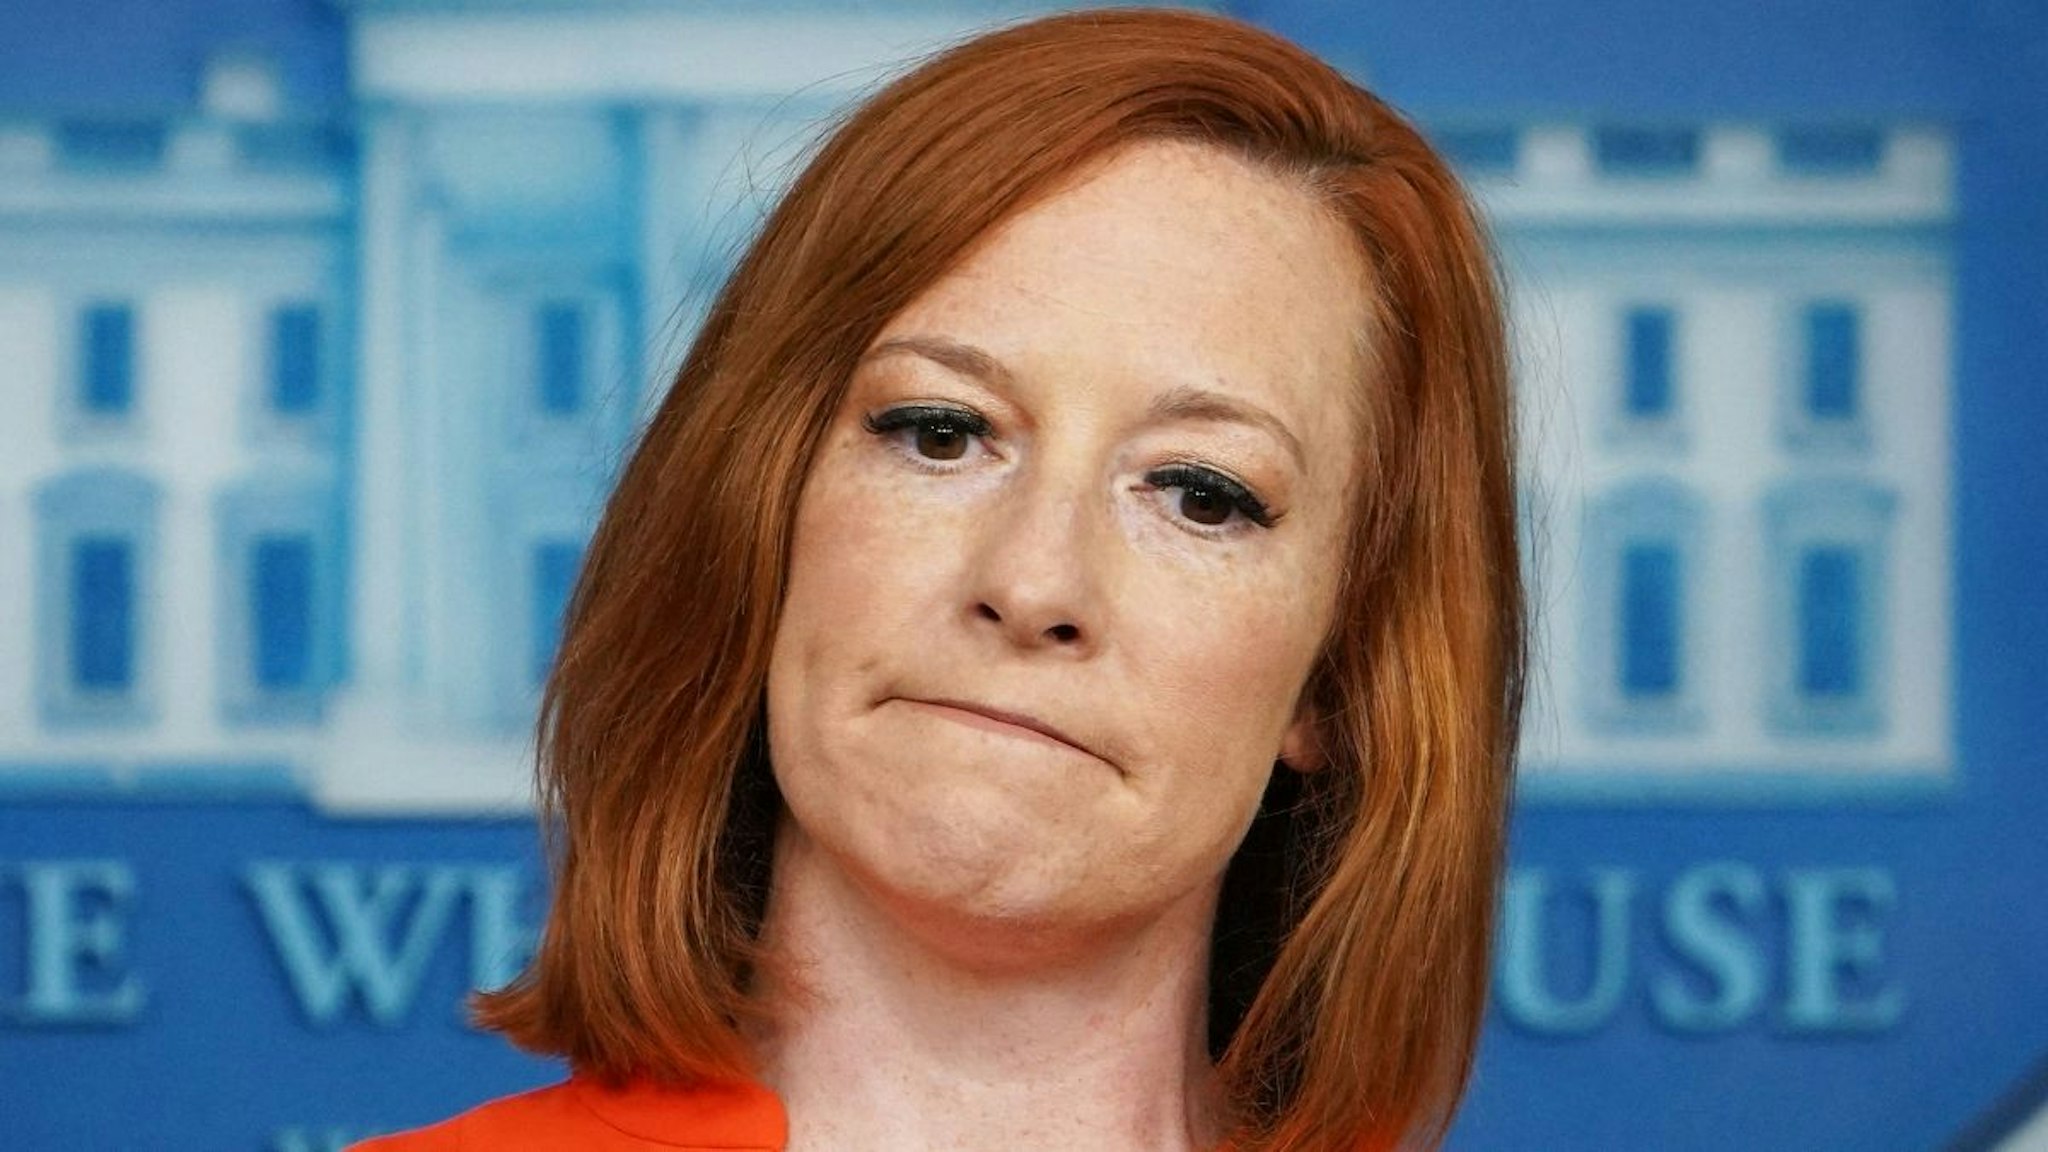 White House Press Secretary Jen Psaki speaks during the daily briefing in the Brady Briefing Room of the White House in Washington, DC on June 21, 2021.